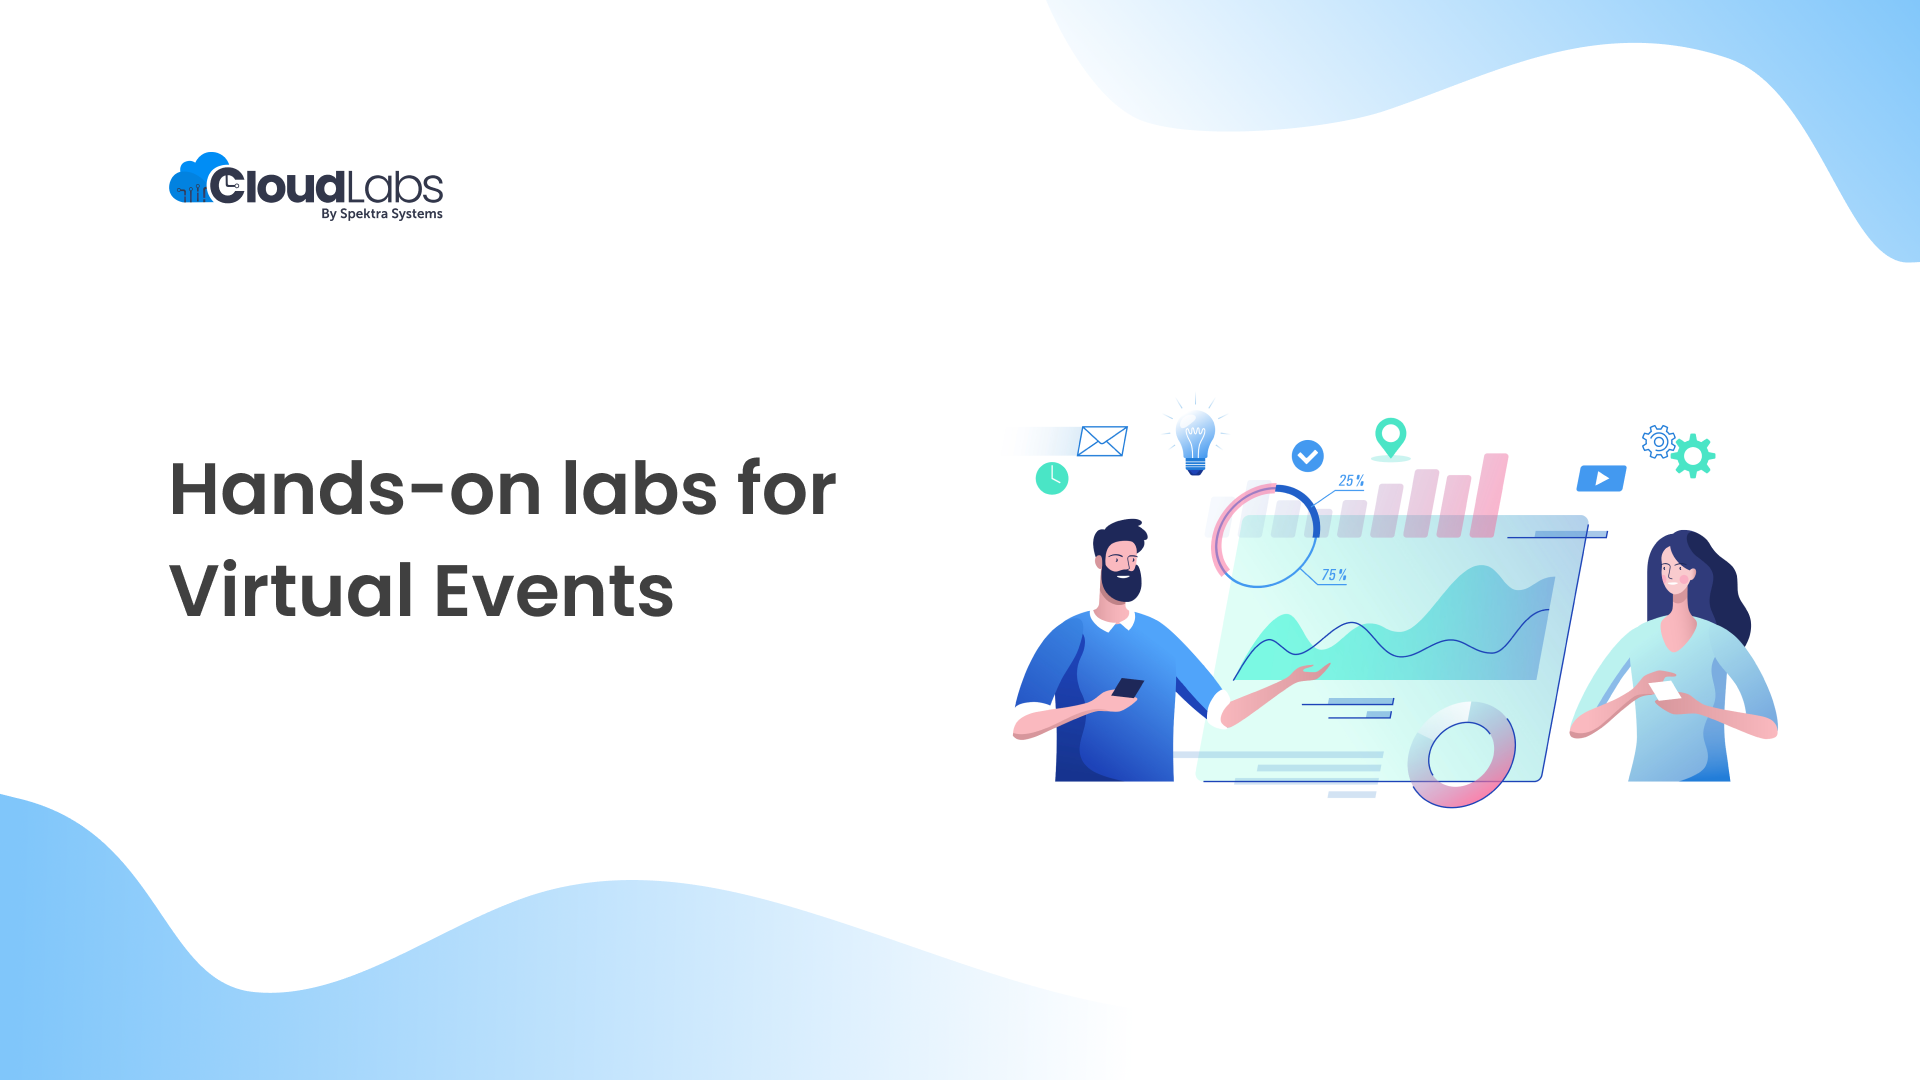 An In-depth Guide to Using Hands-on labs for Virtual Events